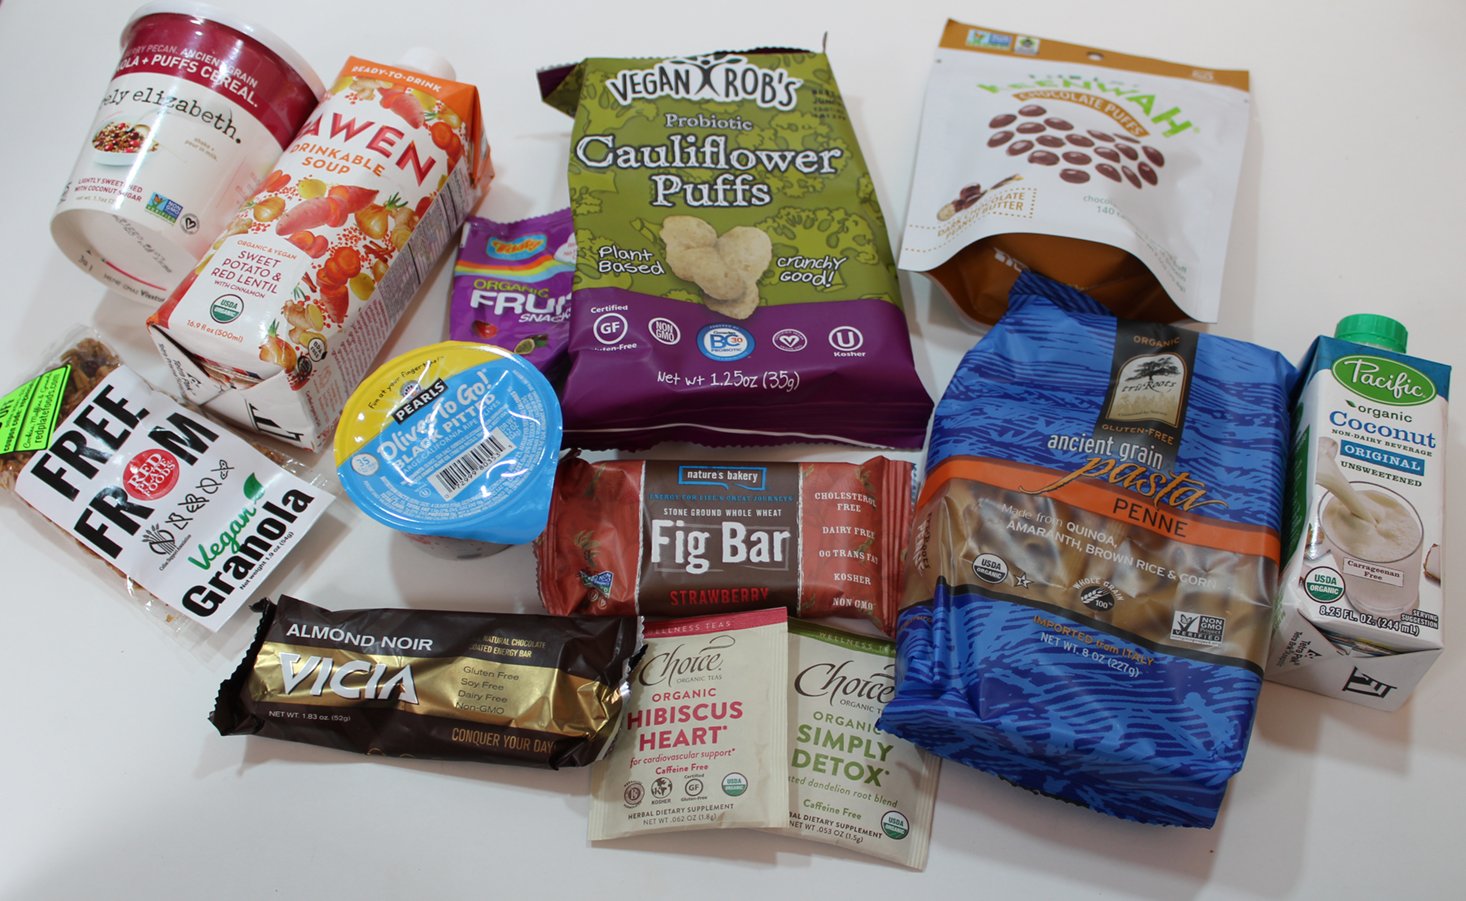 vegan-cuts-snack-march-2017-review